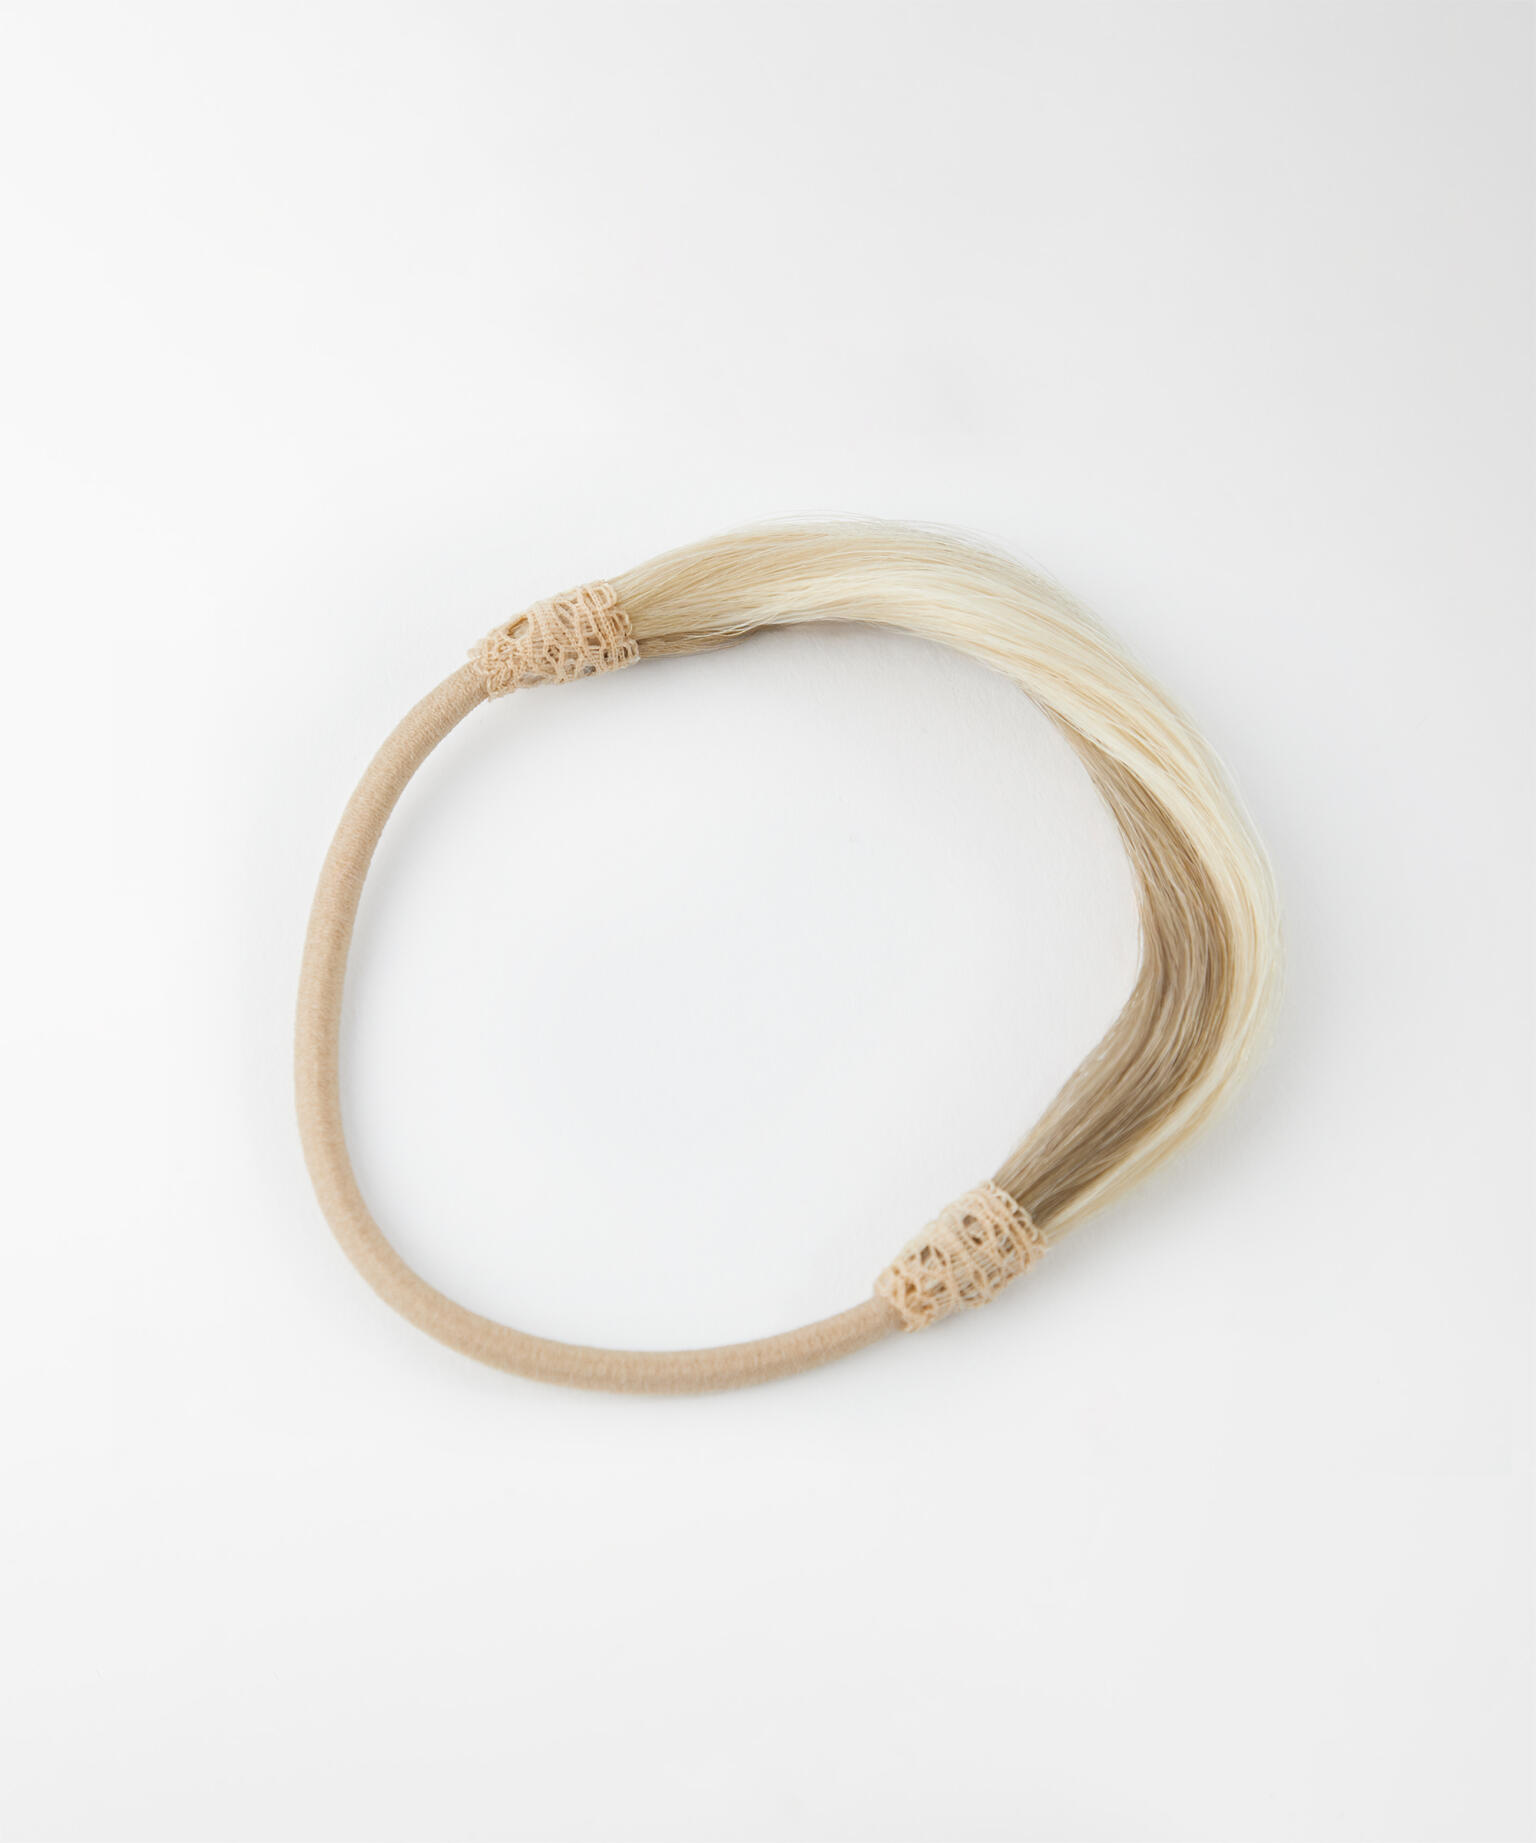 Hair-covered Hair Tie M7.3/10.8 Cendre Ash Blonde Mix